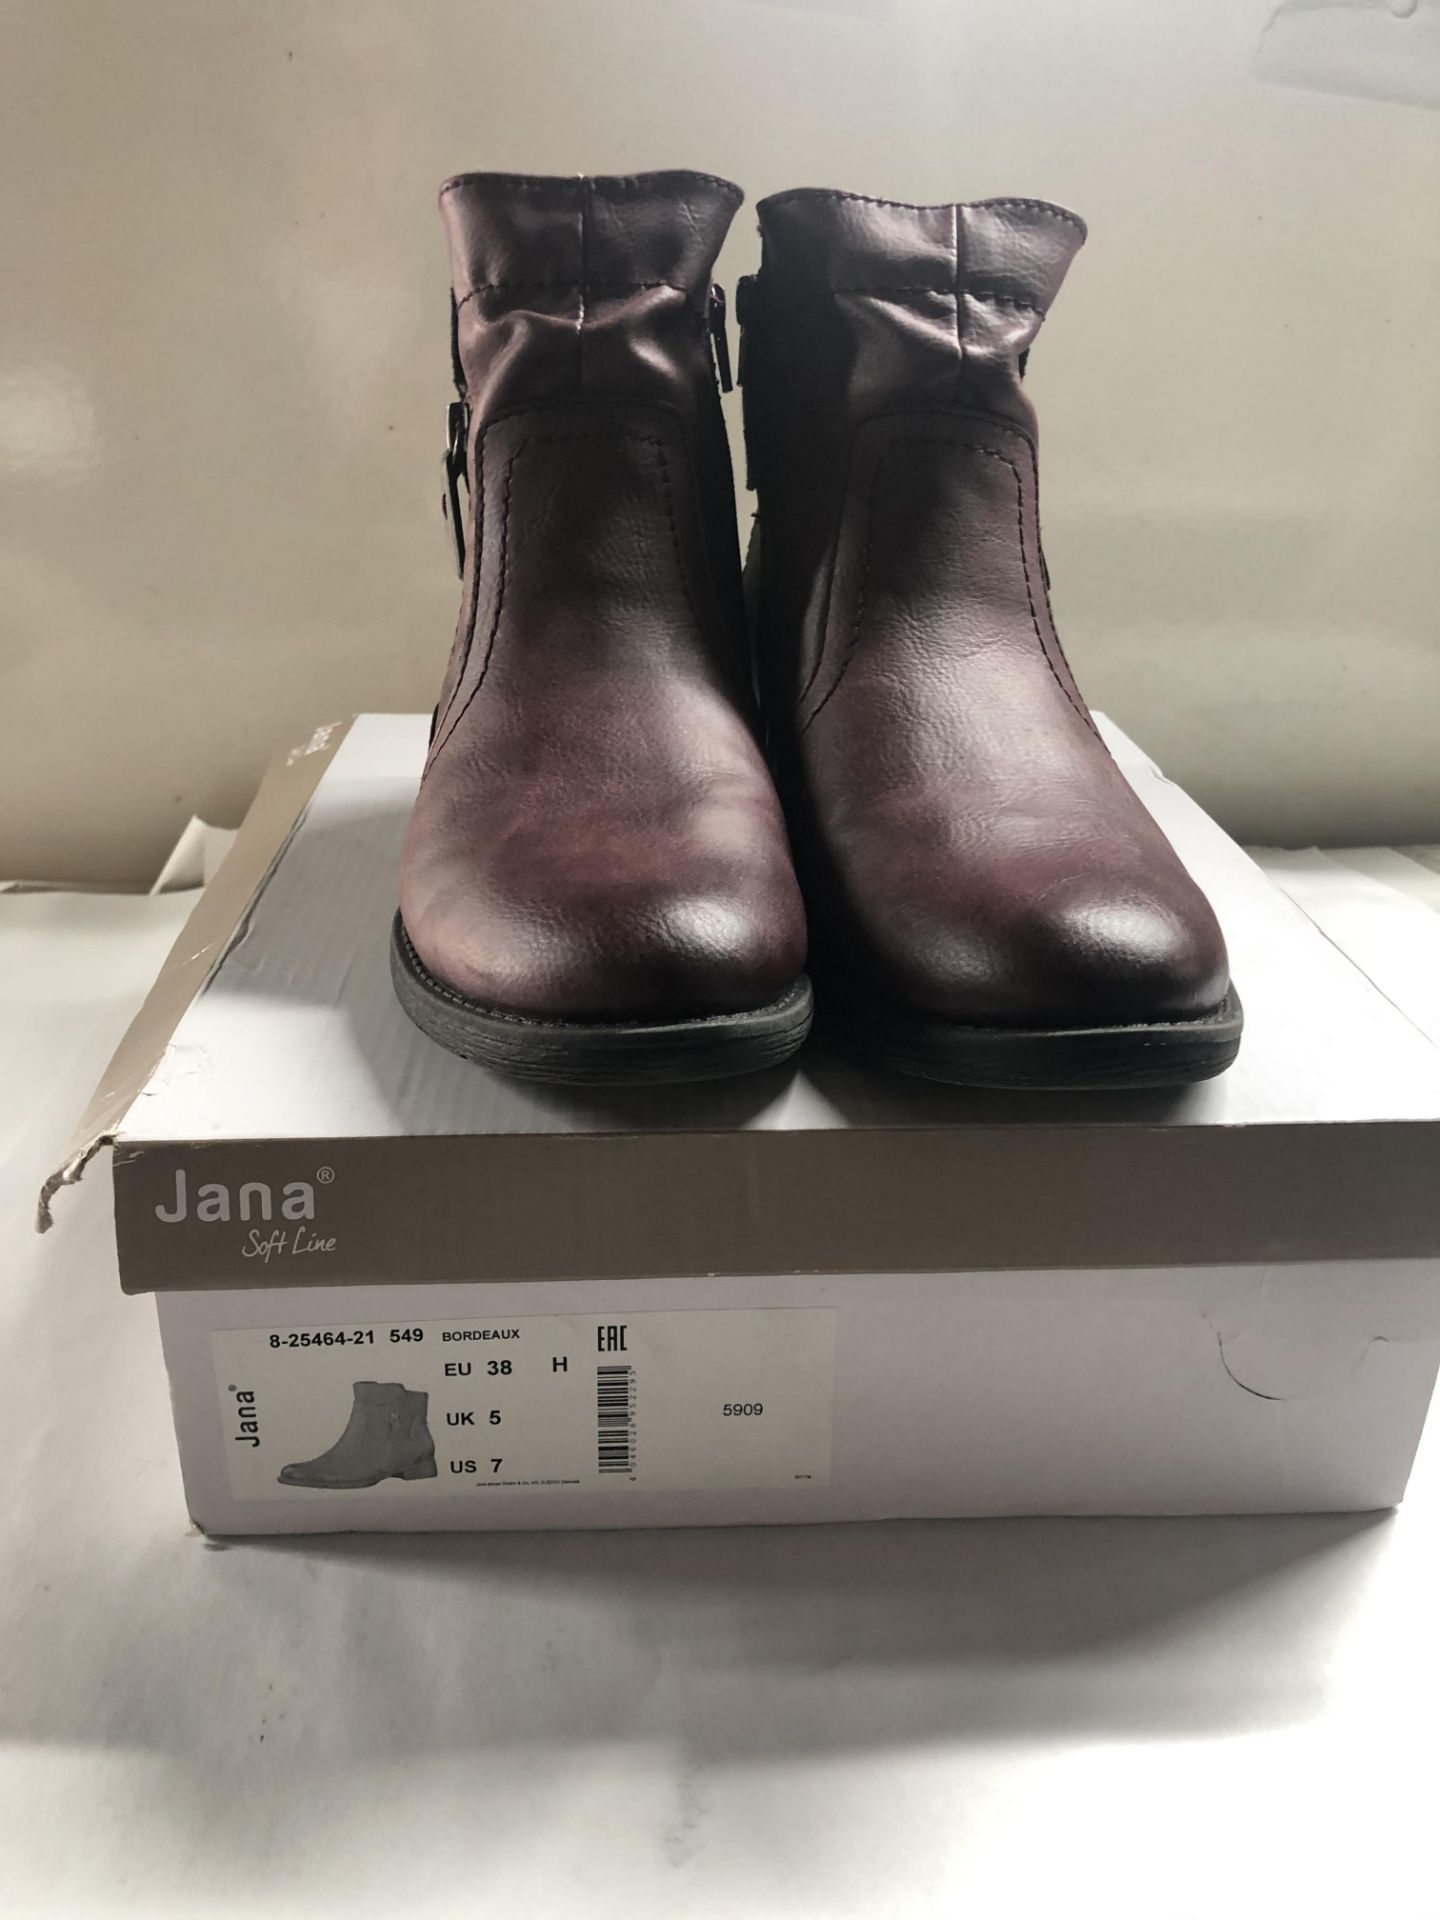 Jana Ankle Boots - Image 2 of 3